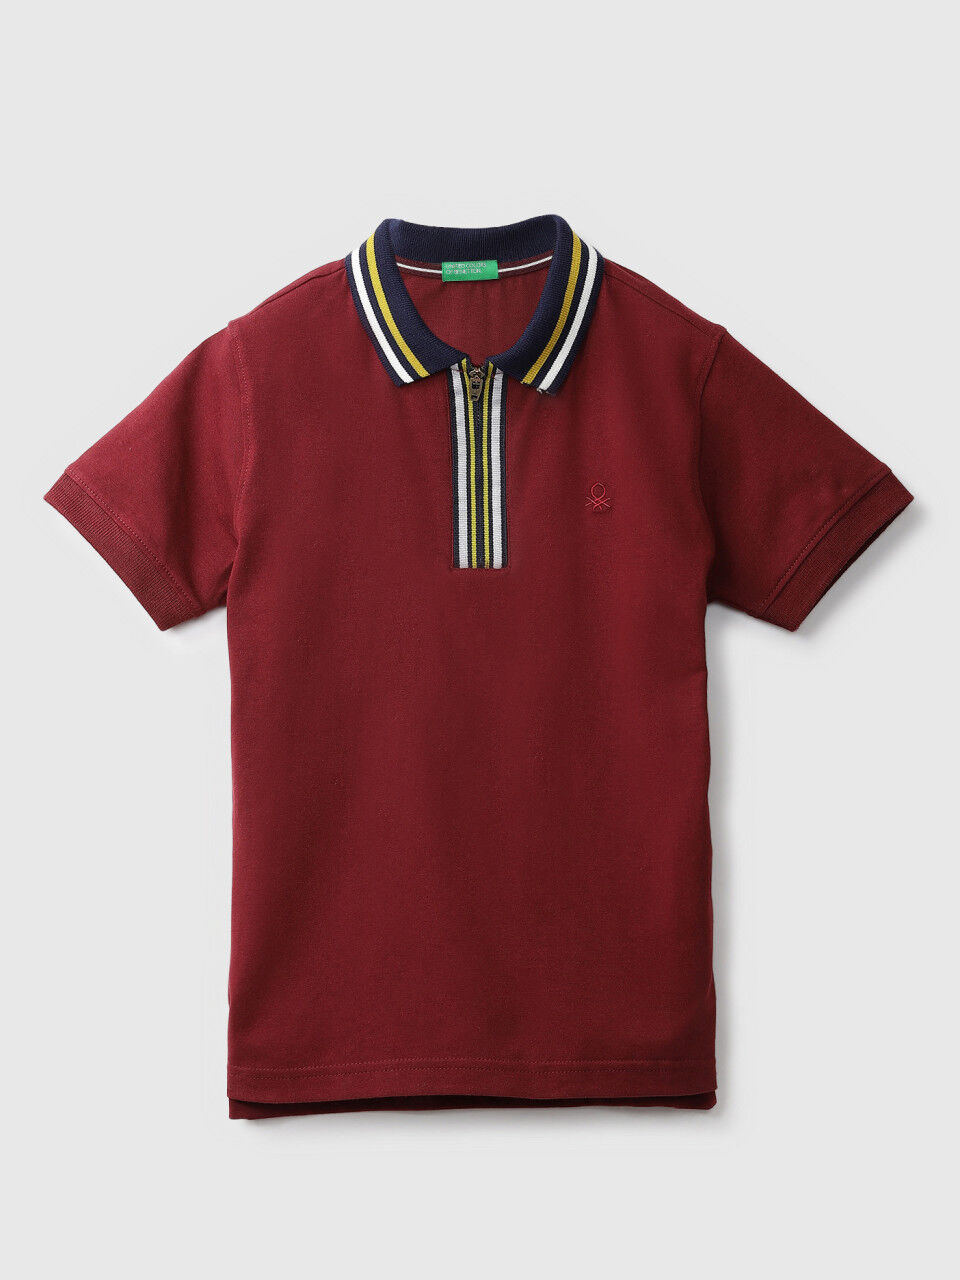 United Colors Of Benetton Burgundy Polo T-Shirt